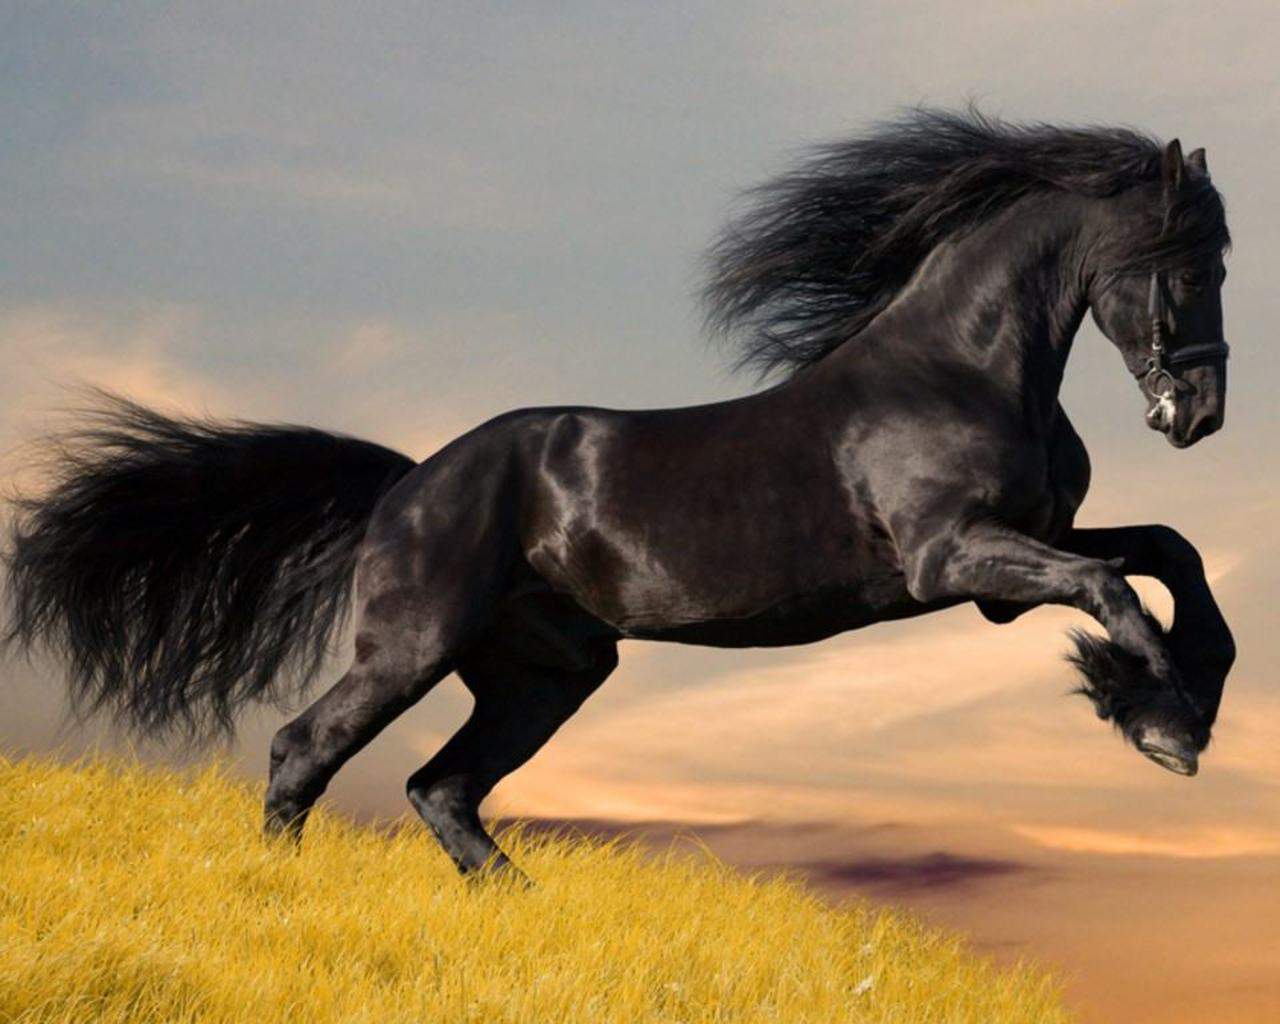 Awesome Horse Image Wallpaper On